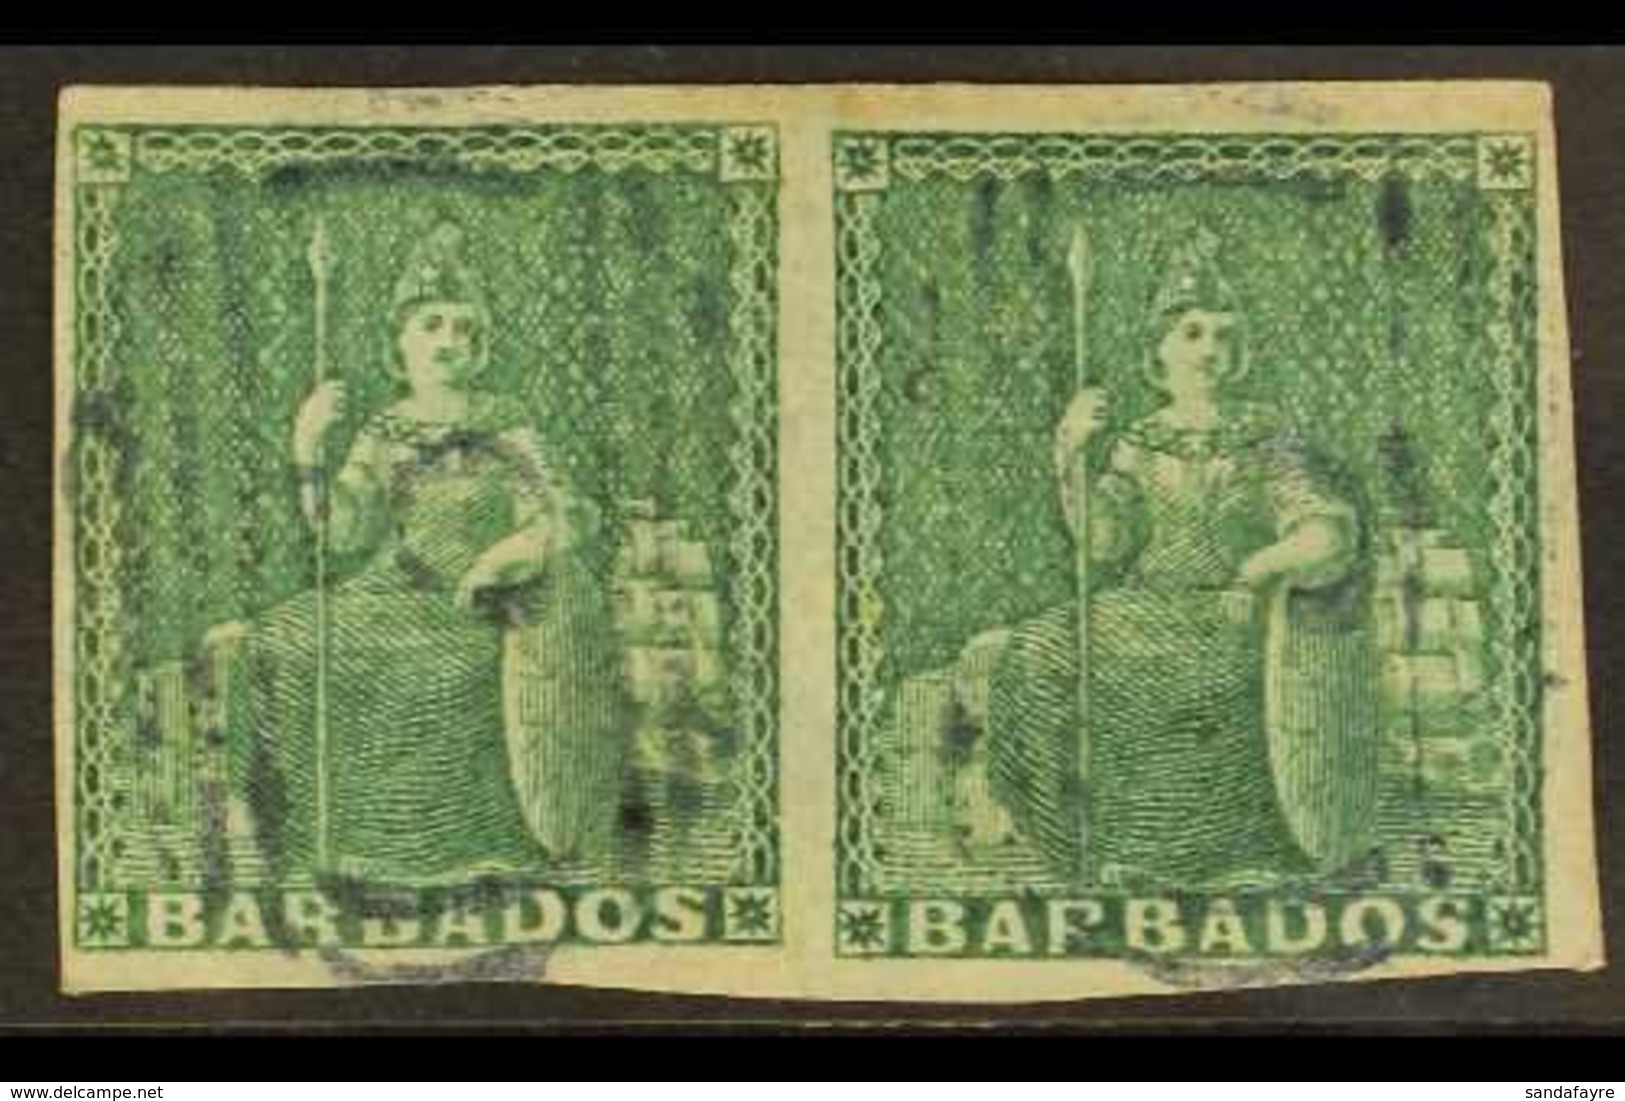 1852 (½d) Deep Green On Blued Paper, Britannia, SG 2, Very Fine Used Pair With Good To Large Margins All Round And Light - Barbados (...-1966)